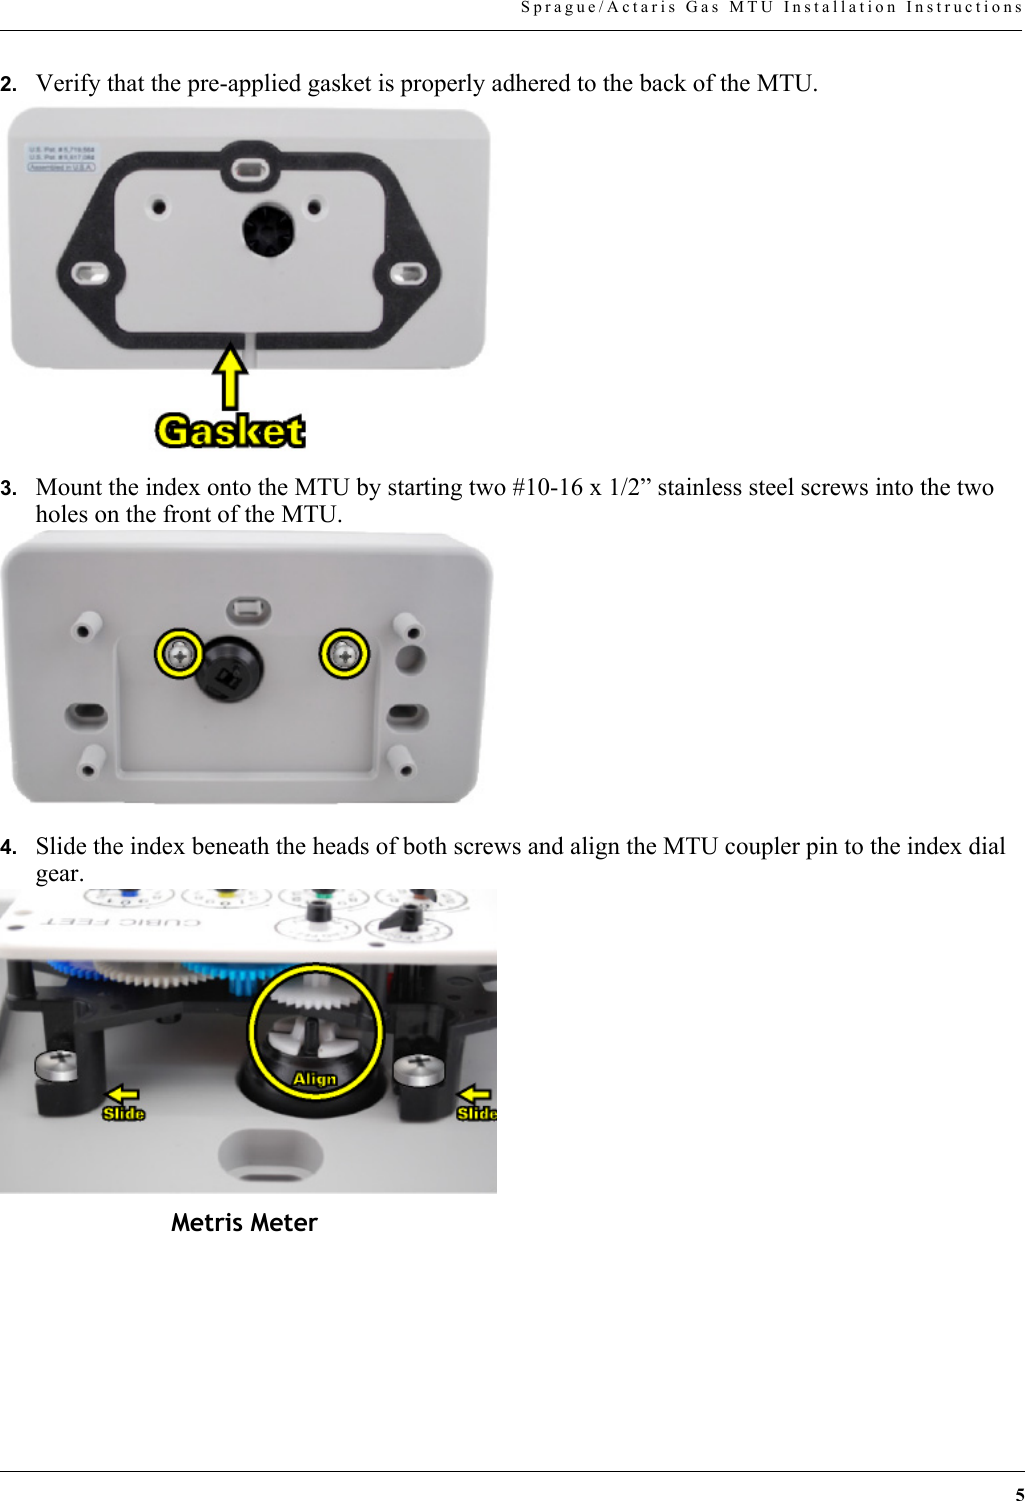 5Sprague/Actaris Gas MTU Installation Instructions2. Verify that the pre-applied gasket is properly adhered to the back of the MTU.3. Mount the index onto the MTU by starting two #10-16 x 1/2” stainless steel screws into the two holes on the front of the MTU.4. Slide the index beneath the heads of both screws and align the MTU coupler pin to the index dial gear.Metris Meter